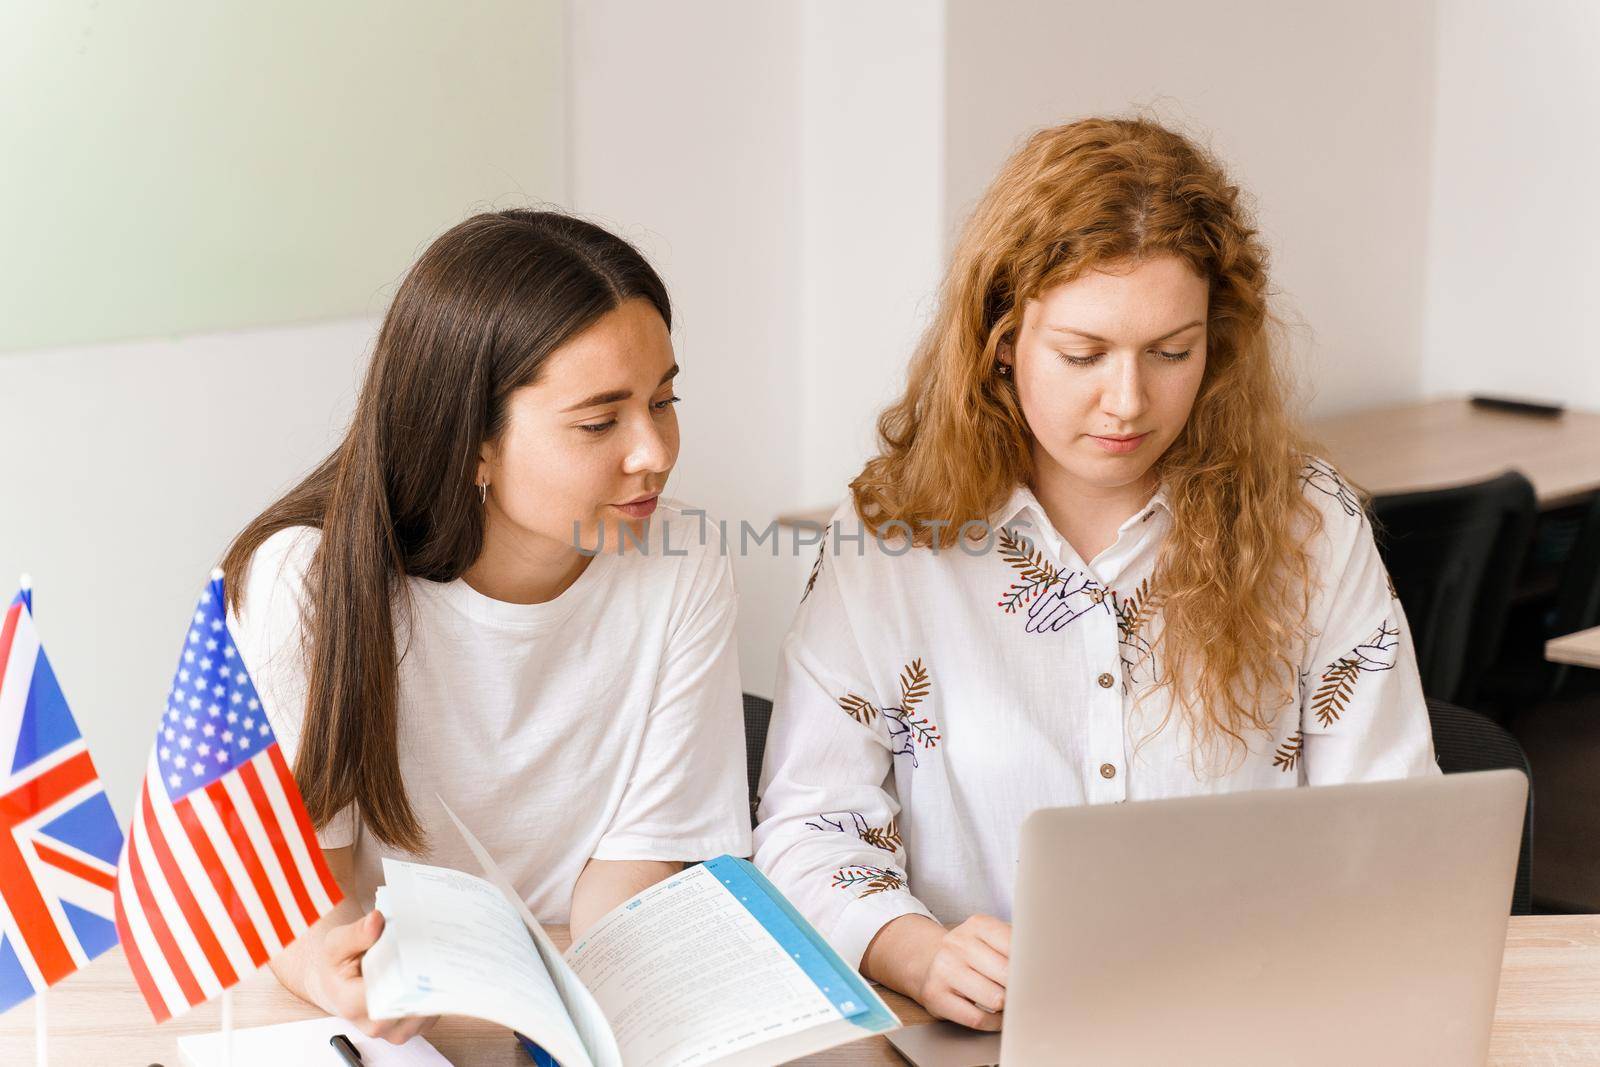 Teacher of english asks student in white class using laptop. 2 girls student answers to teacher. Working in group. Study english and british language.